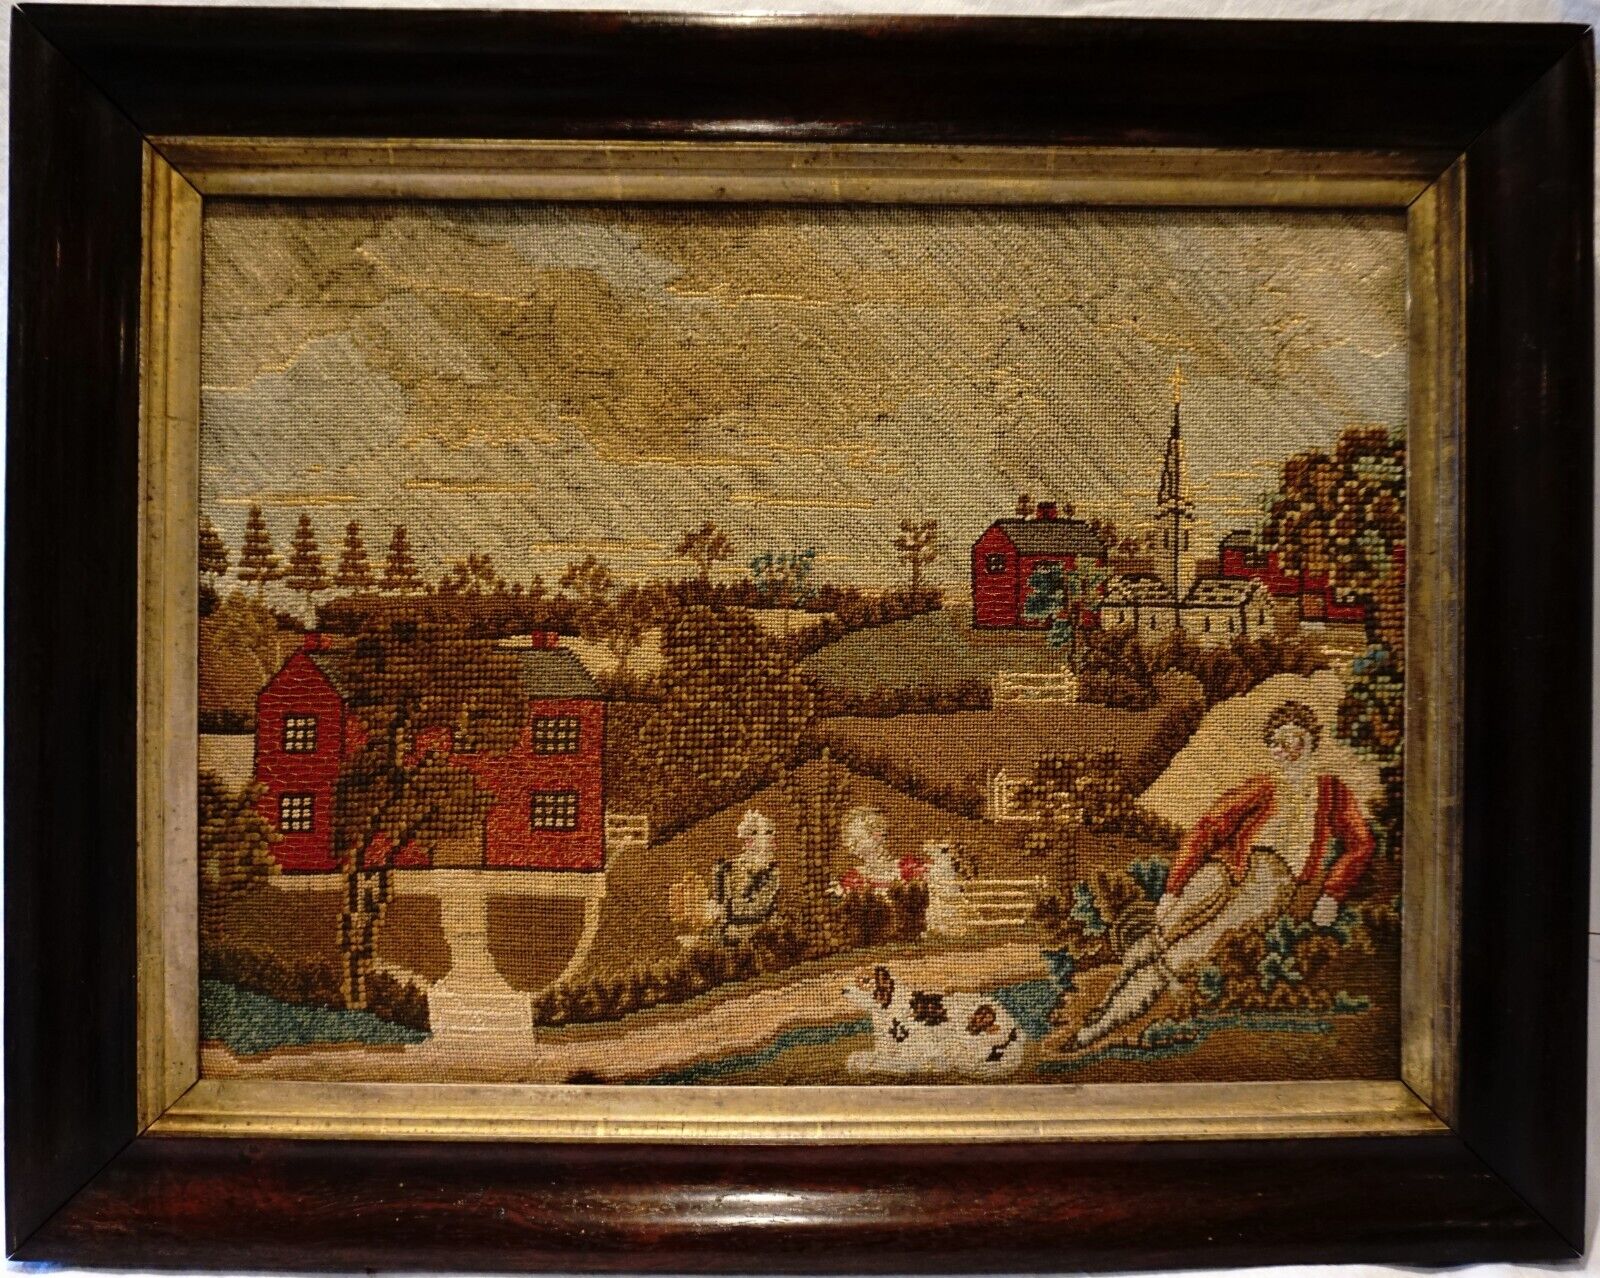 MID 19TH CENTURY NEEDLEPOINT OF A RURAL SCENE WITH DOGS & FIGURES - c.1860